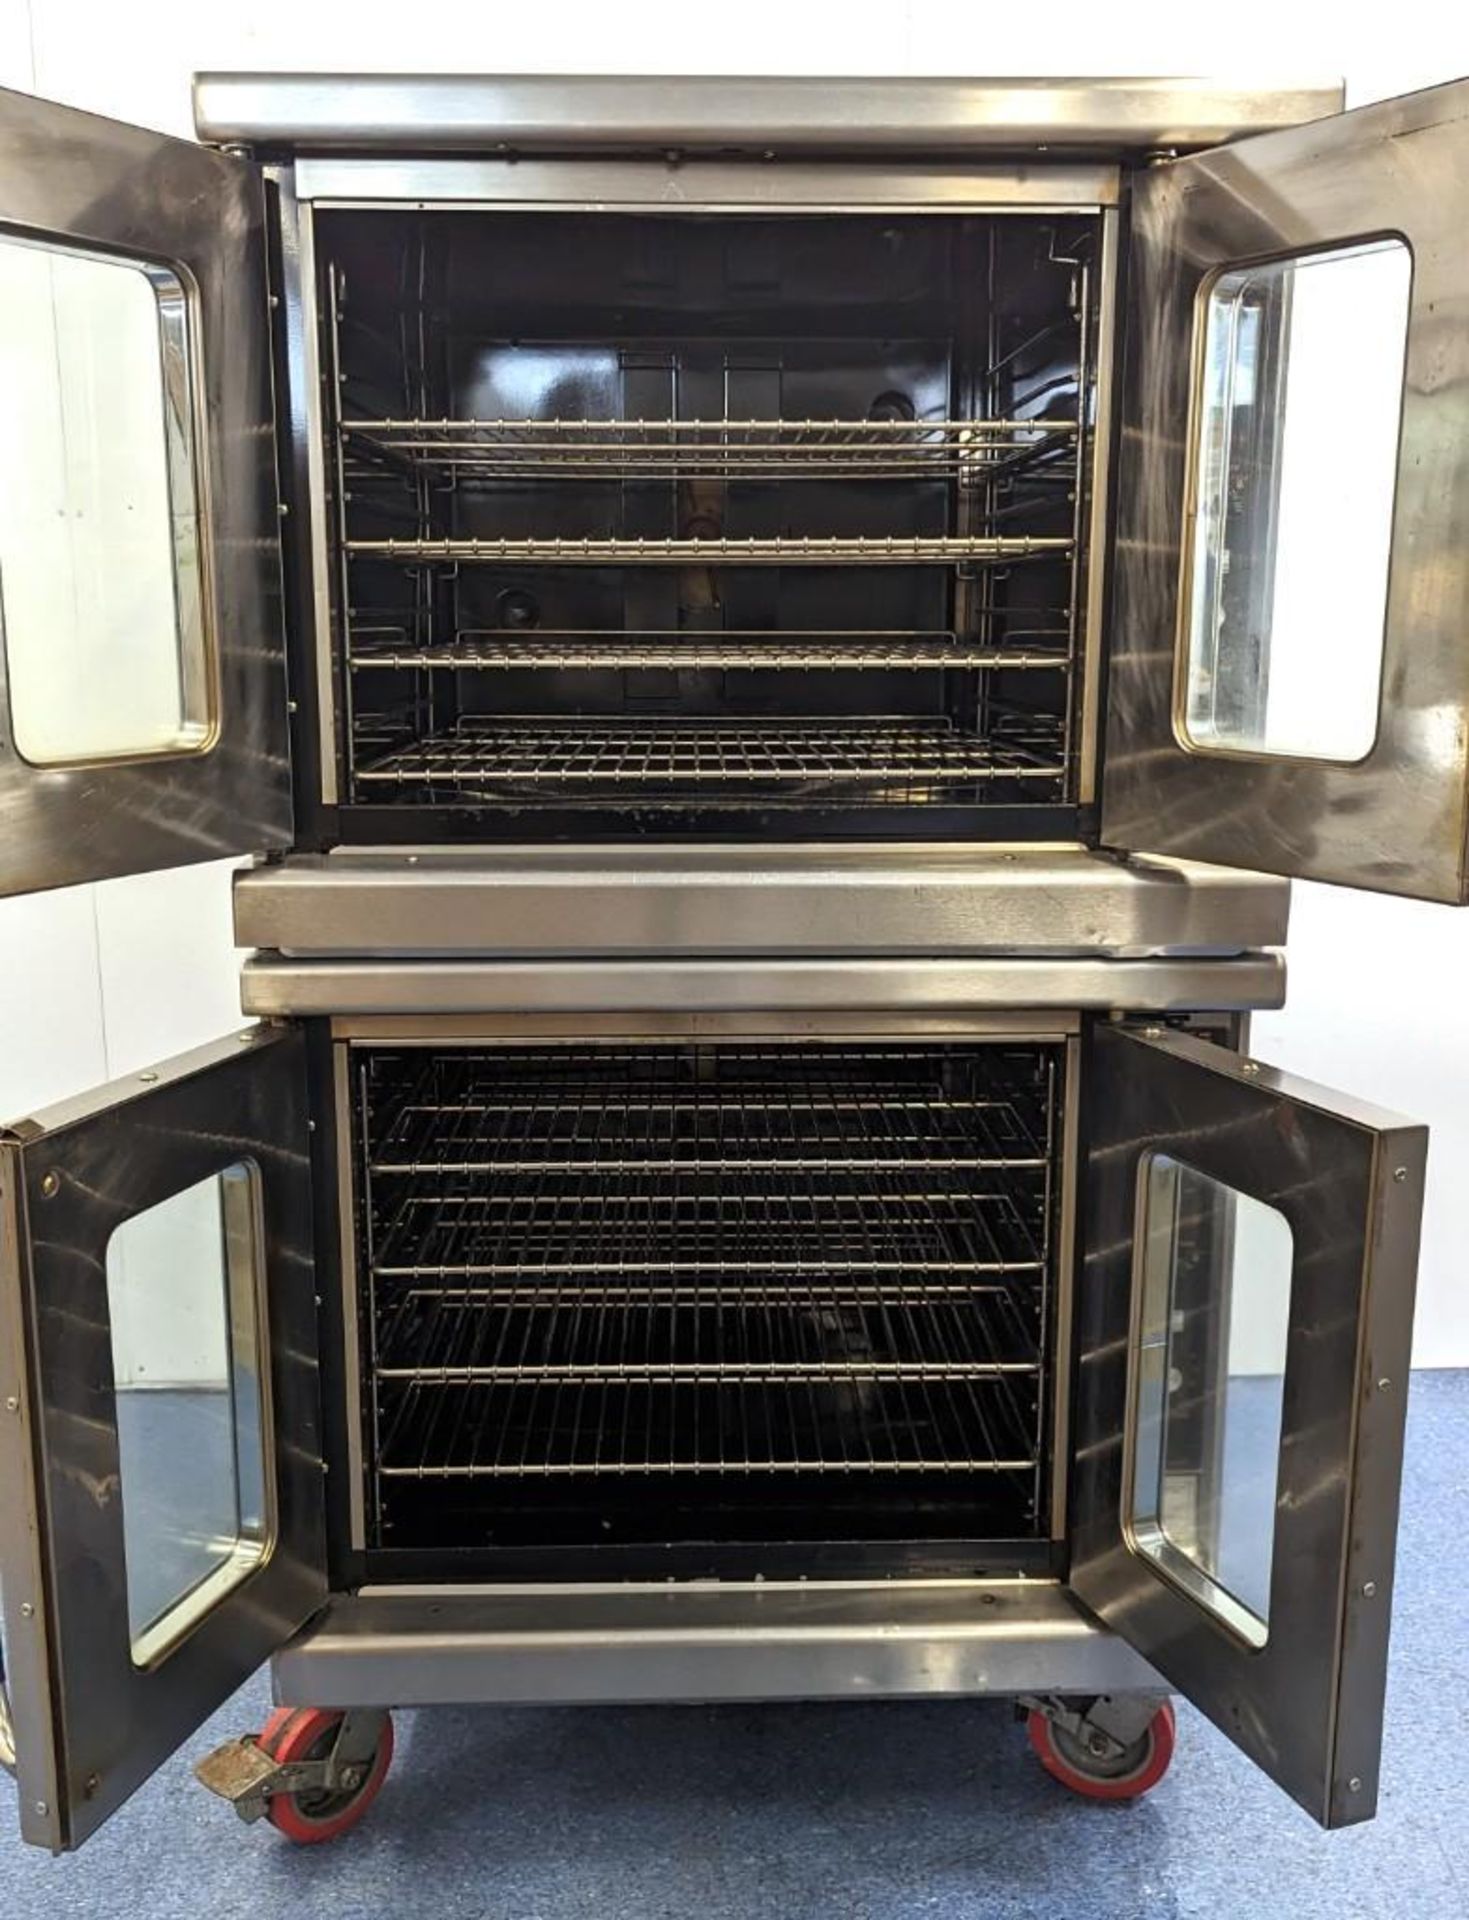 MONTAGUE EK15A VECTAIRE SINGLE PHASE ELECTRIC CONVECTION OVENS - Image 8 of 13